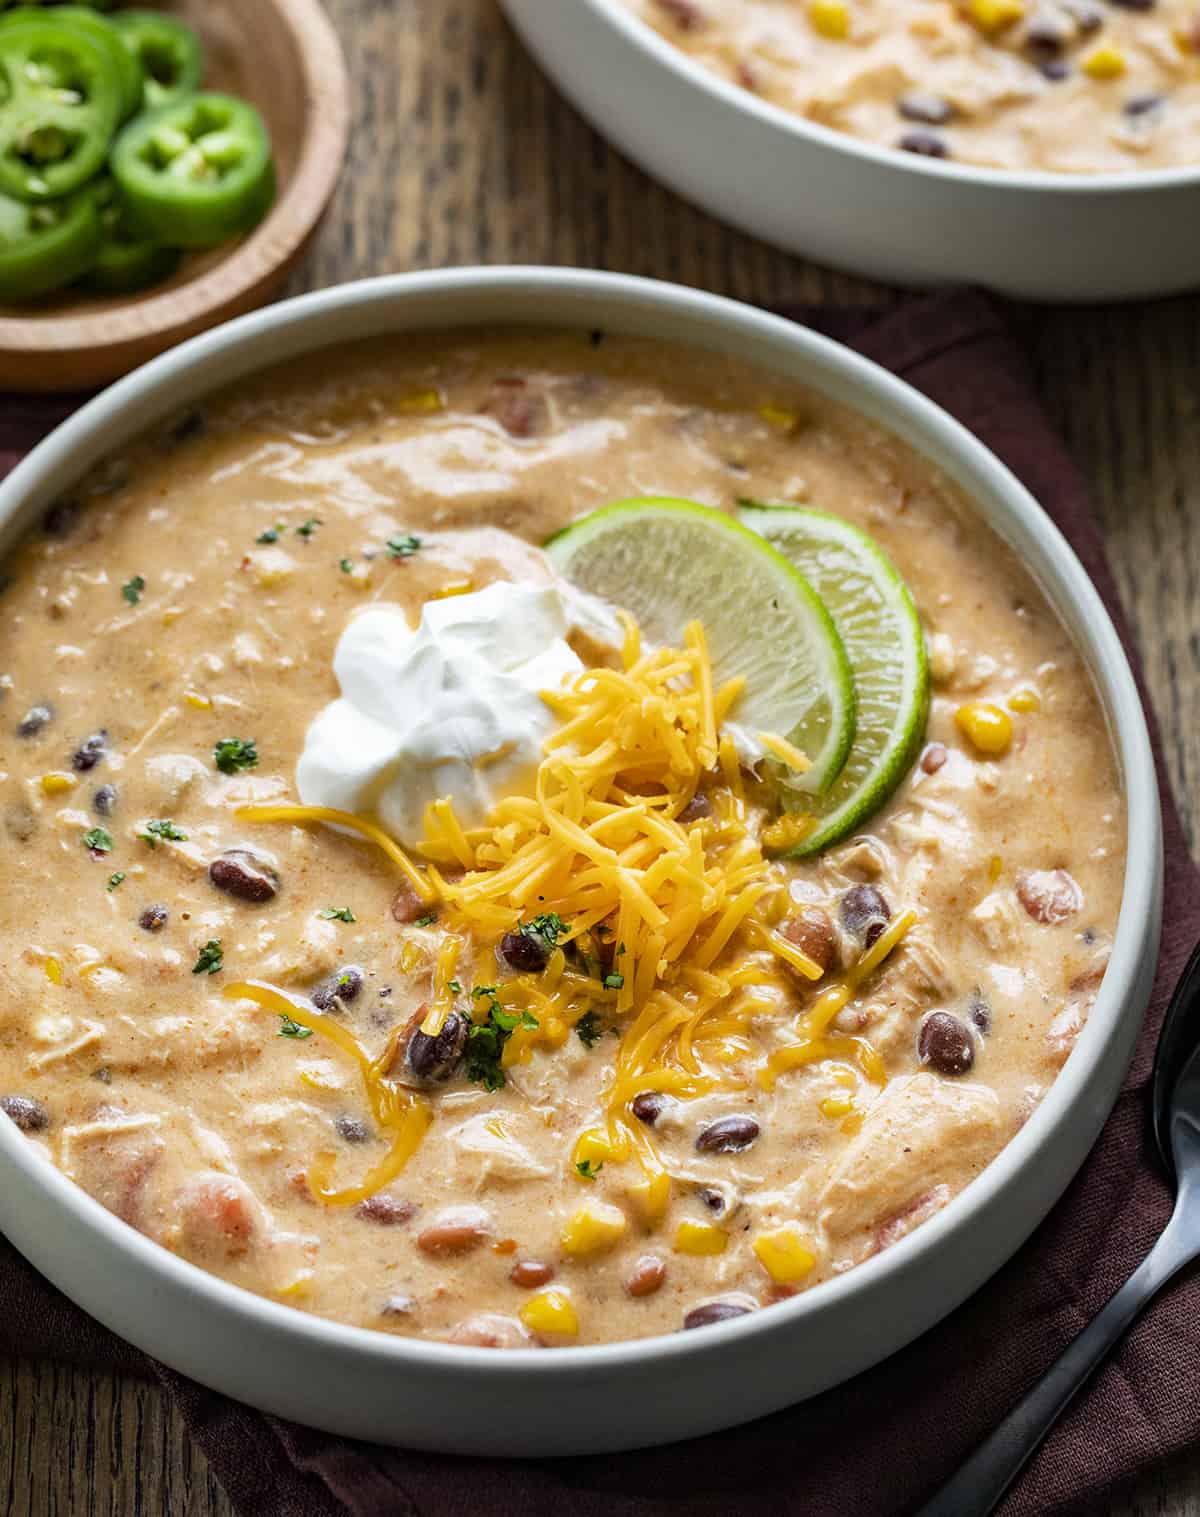 Bowl of 7 Can Creamy Chicken Taco Soup. Soup, Comfort Soups, Soup Recipes, Soup Recipes, Creamy Soups, 7 Can Chicken Taco Soup, Seven Can Creamy Chicken Taco Soup, fall soups, Easy Soups, easy Soup Recipes, i am homesteader, iamhomesteader